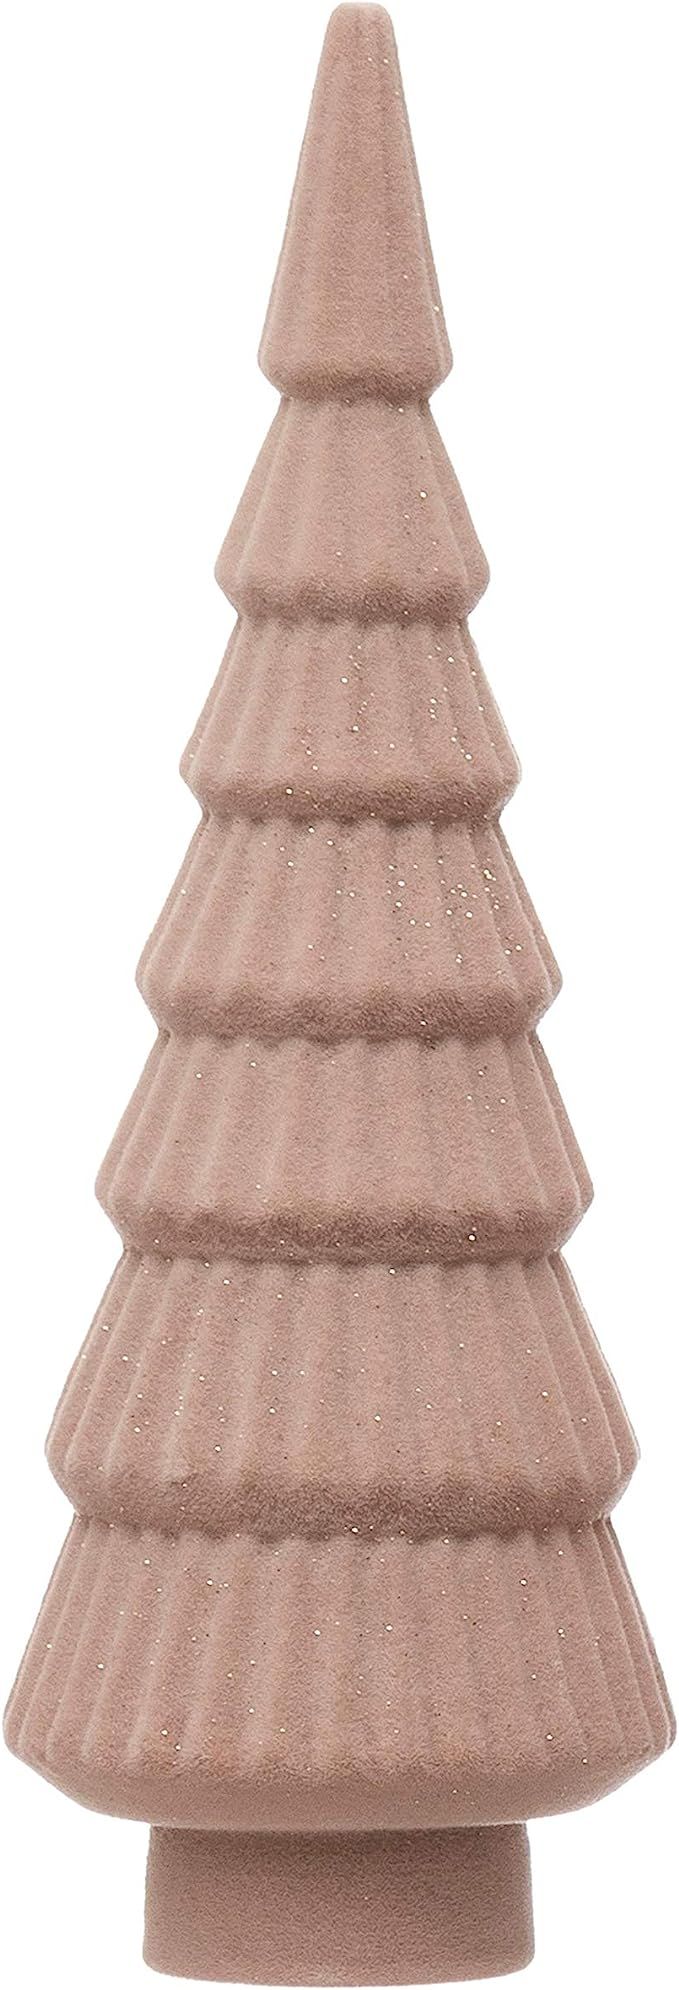 Creative Co-Op 2-1/2" Round x 8" H Flocked Resin Tree, Pink Figures and Figurines, Multi | Amazon (US)